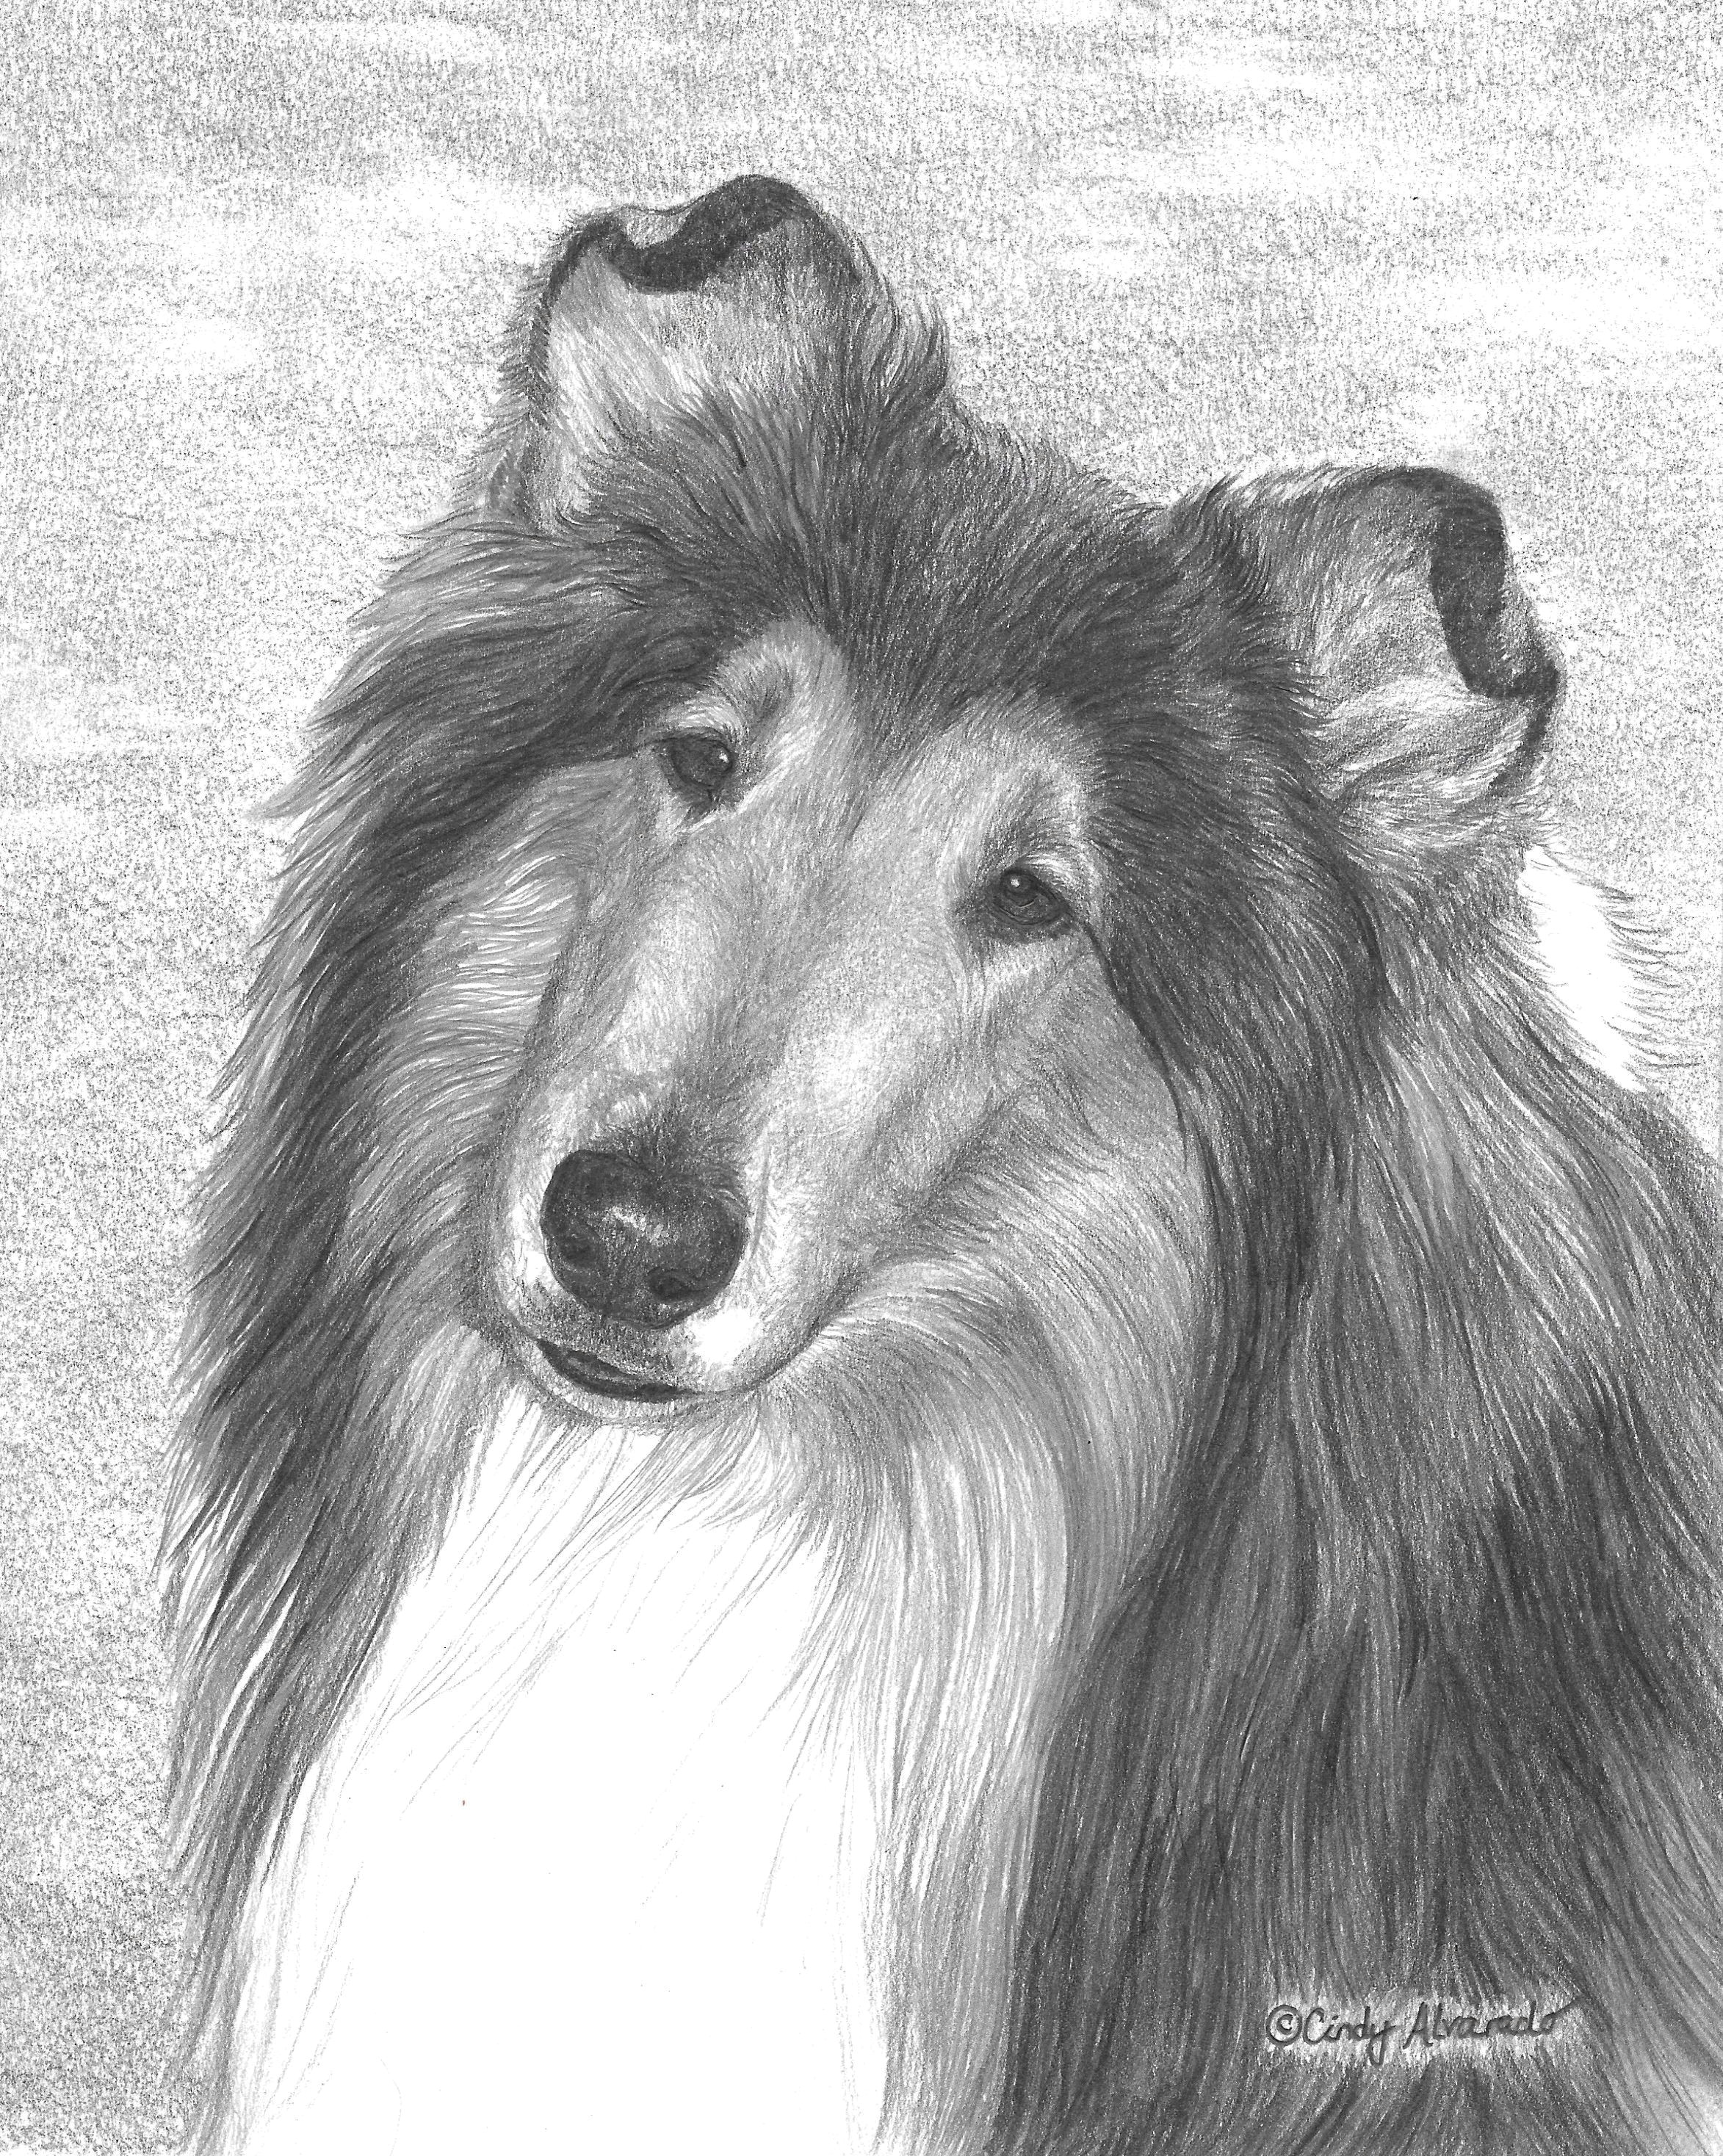 Drawing Collie Dogs Fella Portrait Commission This is A Graphite Pencil Drawing that I